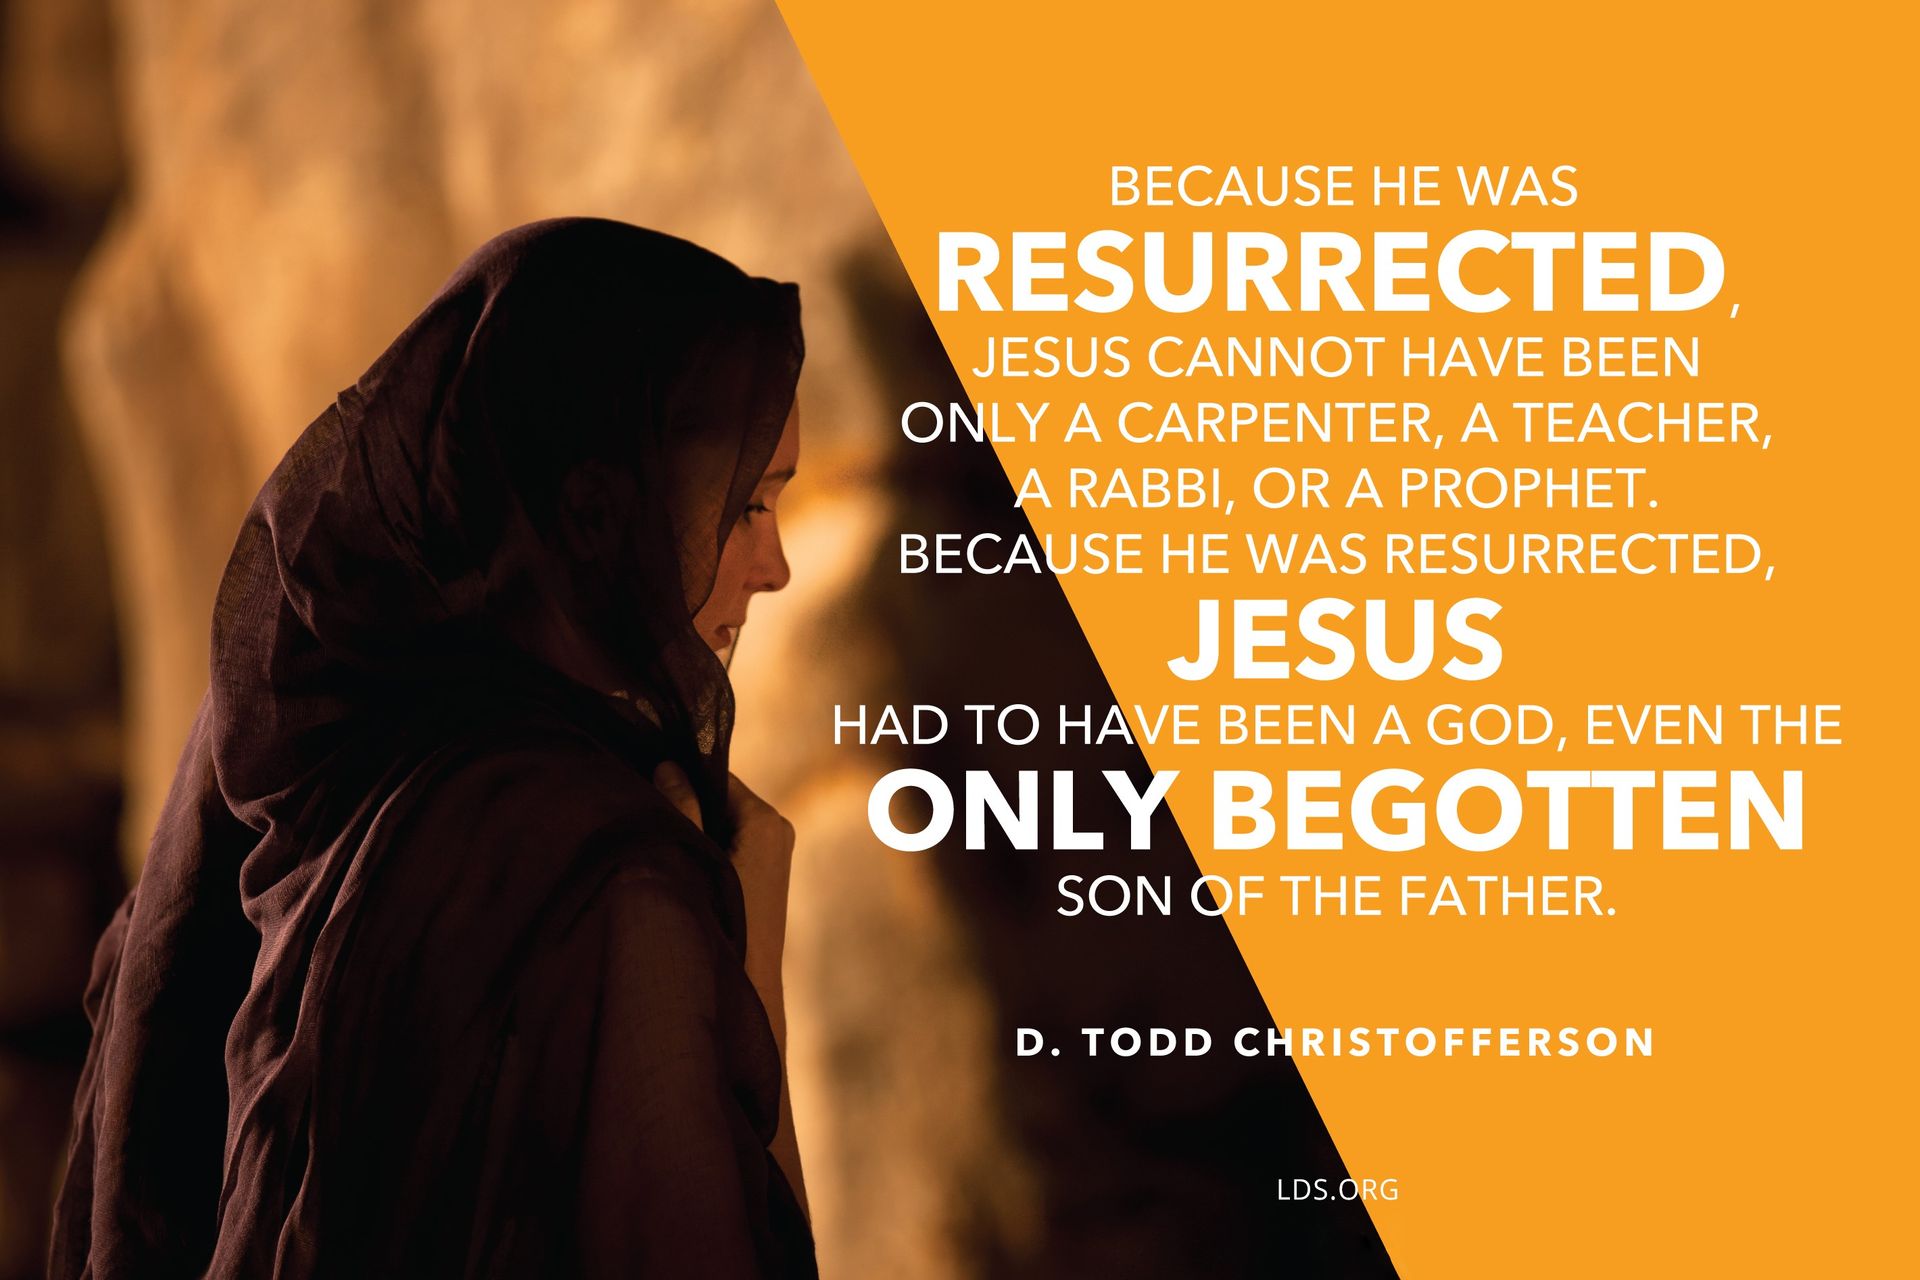 “Because He was resurrected, Jesus cannot have been only a carpenter, a teacher, a rabbi, or a prophet. Because He was resurrected, Jesus had to have been a God, even the Only Begotten Son of the Father.”—Elder D. Todd Christofferson, “The Resurrection of Jesus Christ” © See Individual Images ipCode 1.